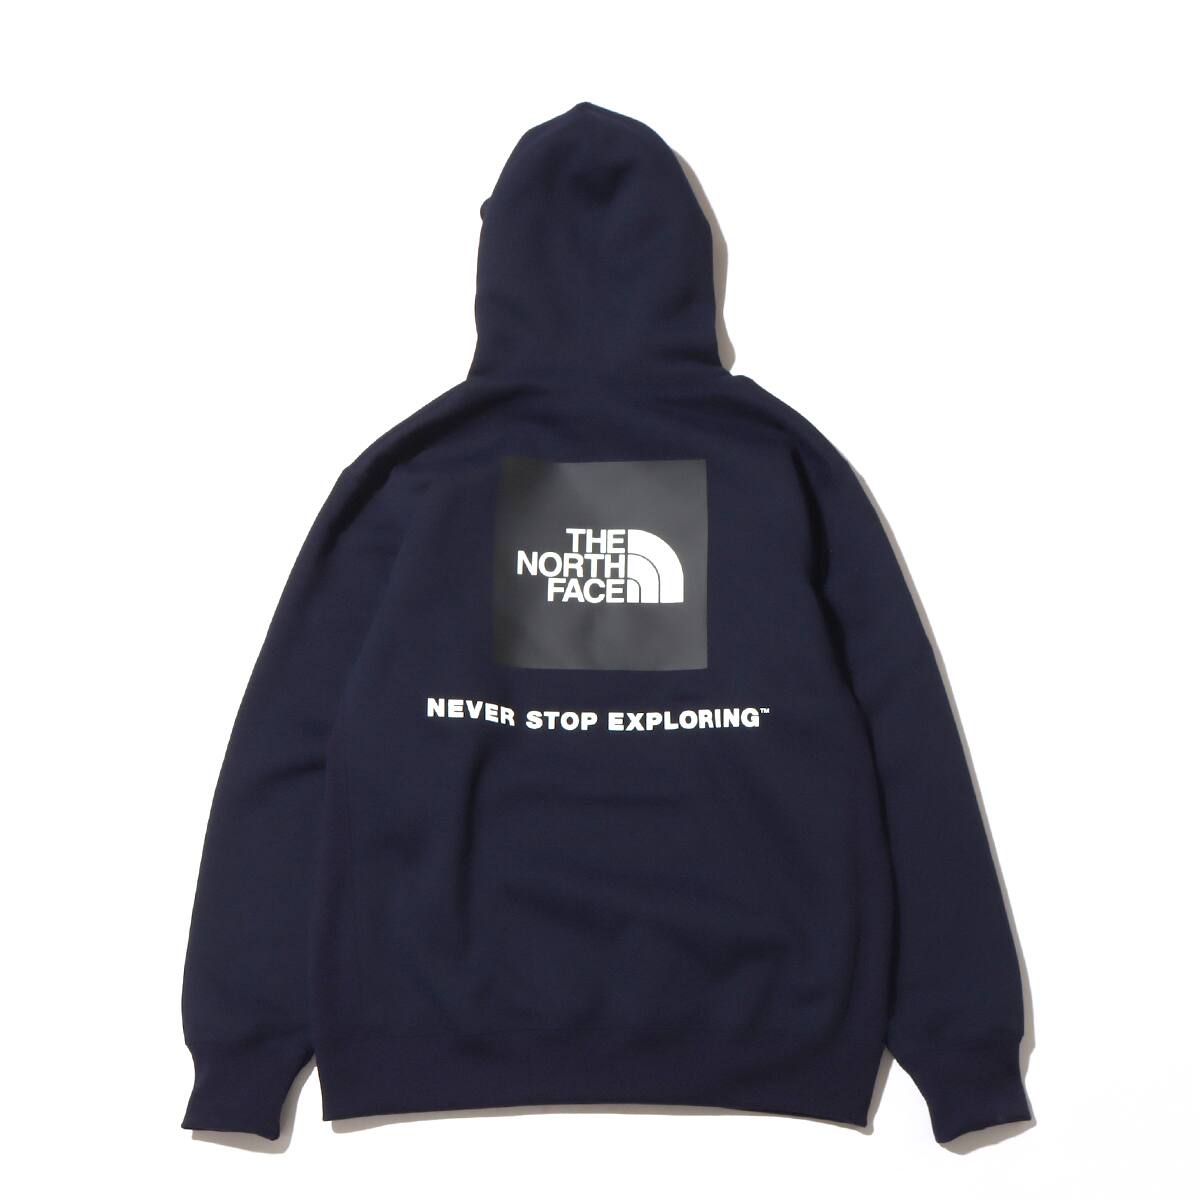 THE NORTH FACE BACK SPUARE LOGO HOODIE アビエイターネイビー 22FW-I